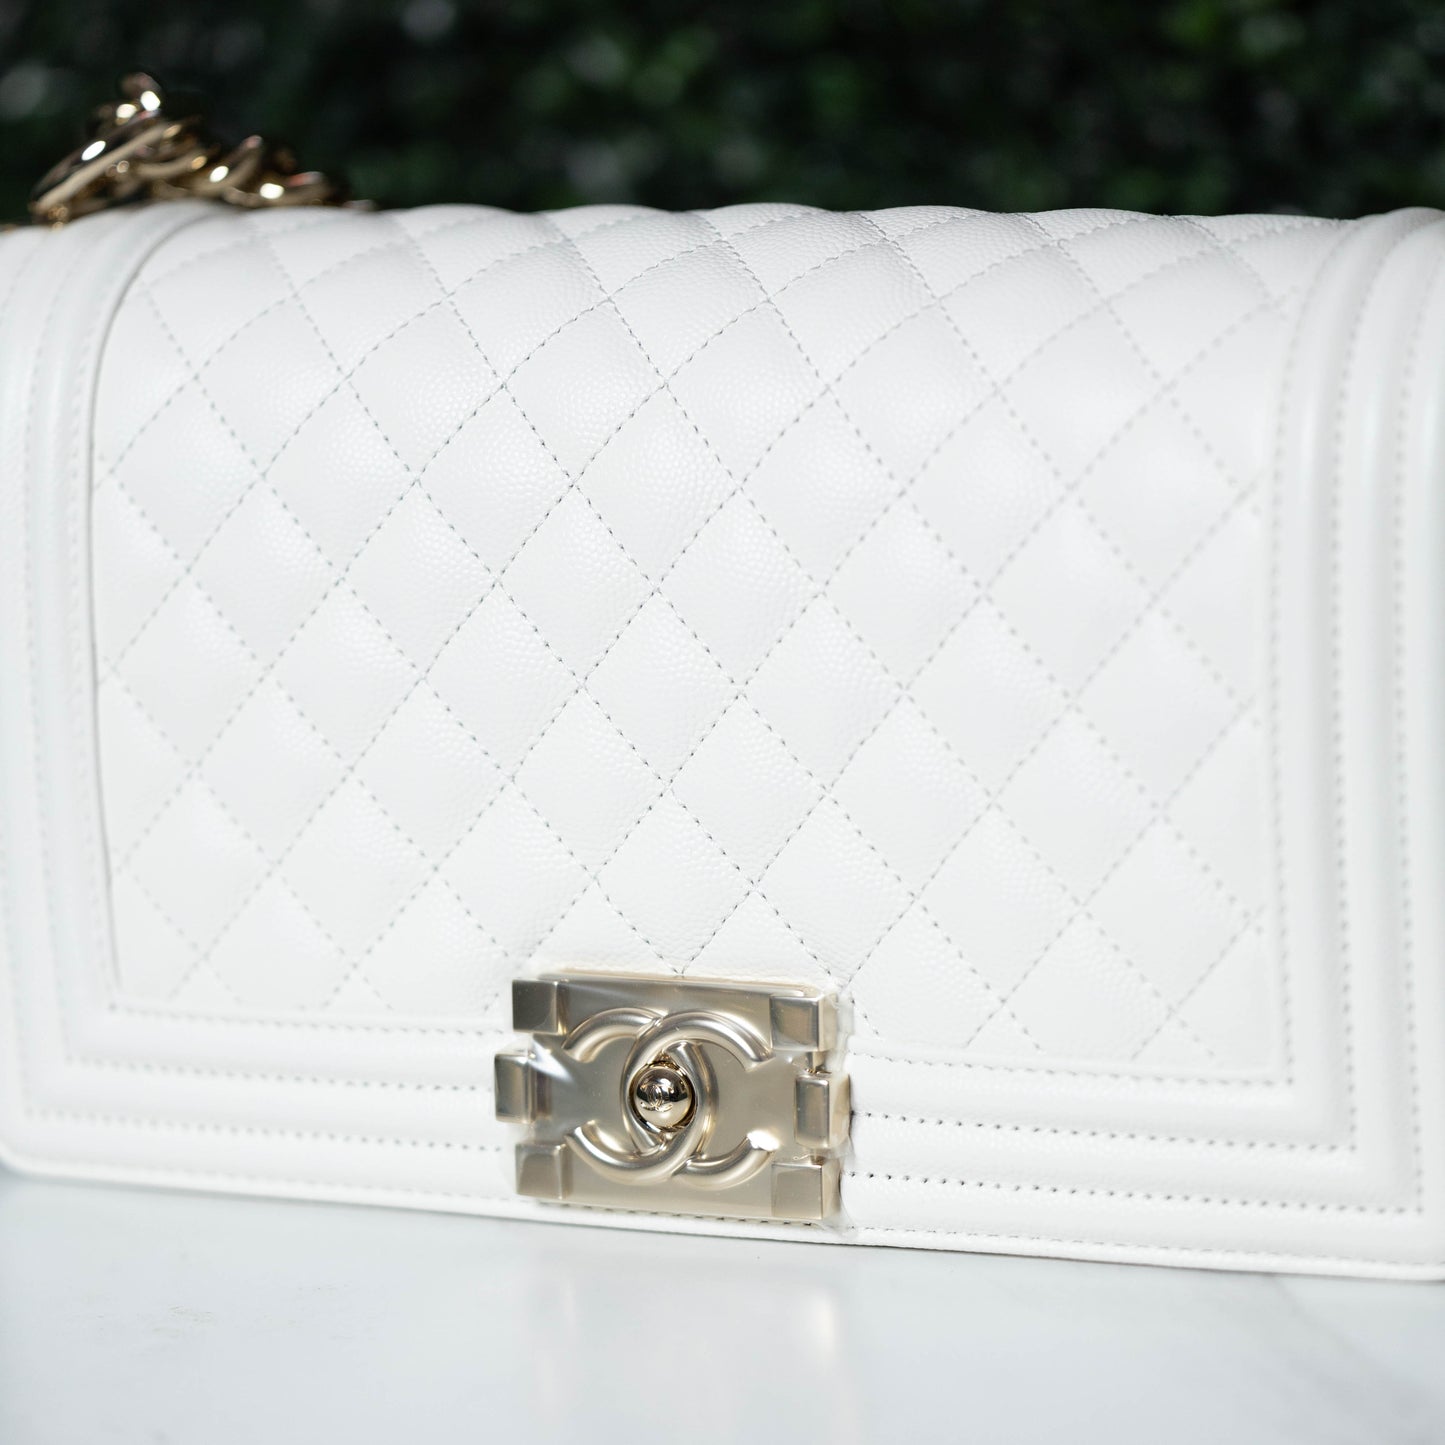 Chanel Boy Bag White with Gold Hardware 23A